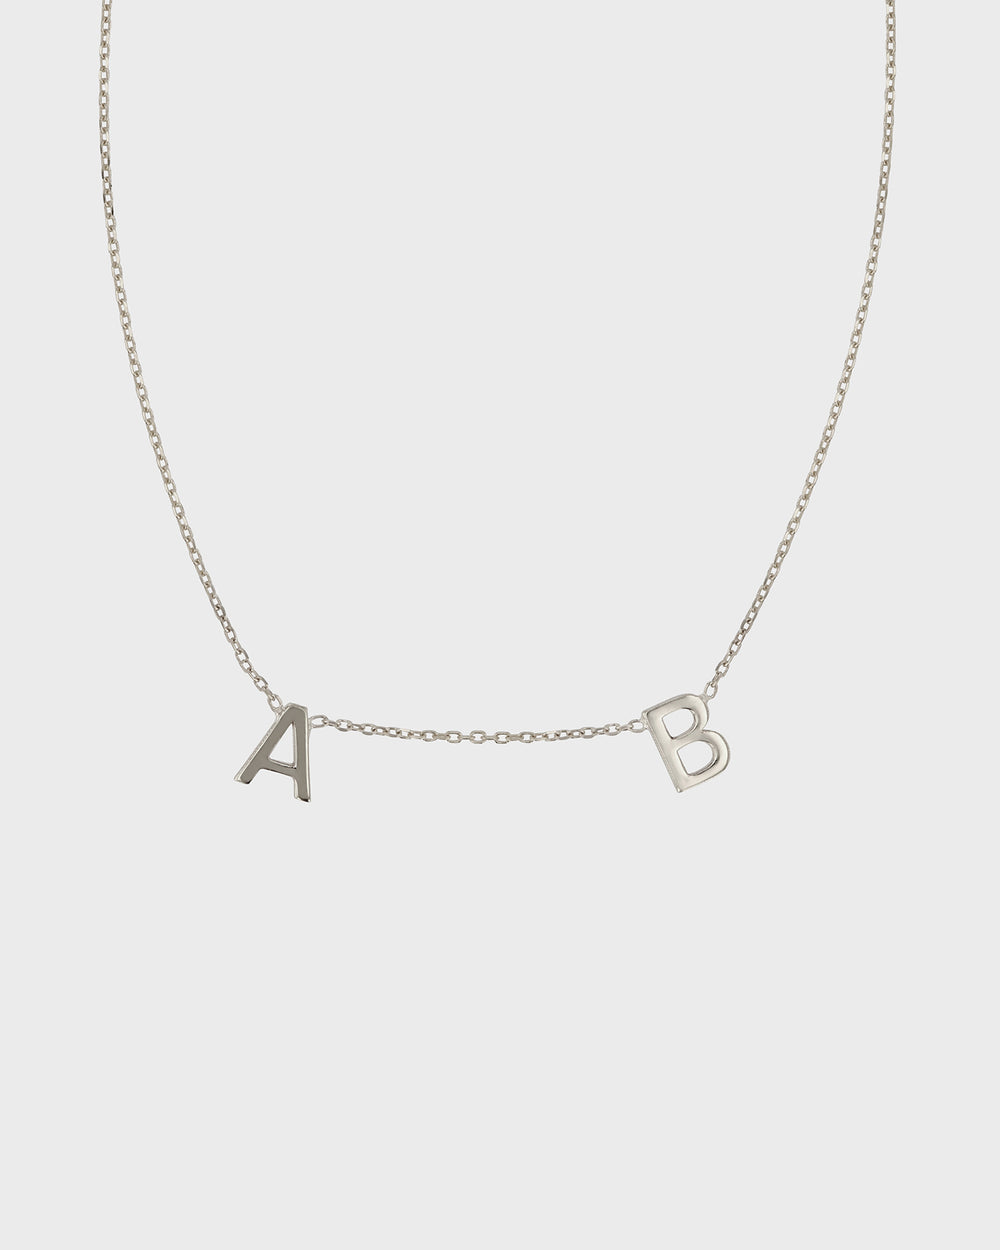 Personalized 5 Letter Necklace in 14k Gold (Single Spacing)